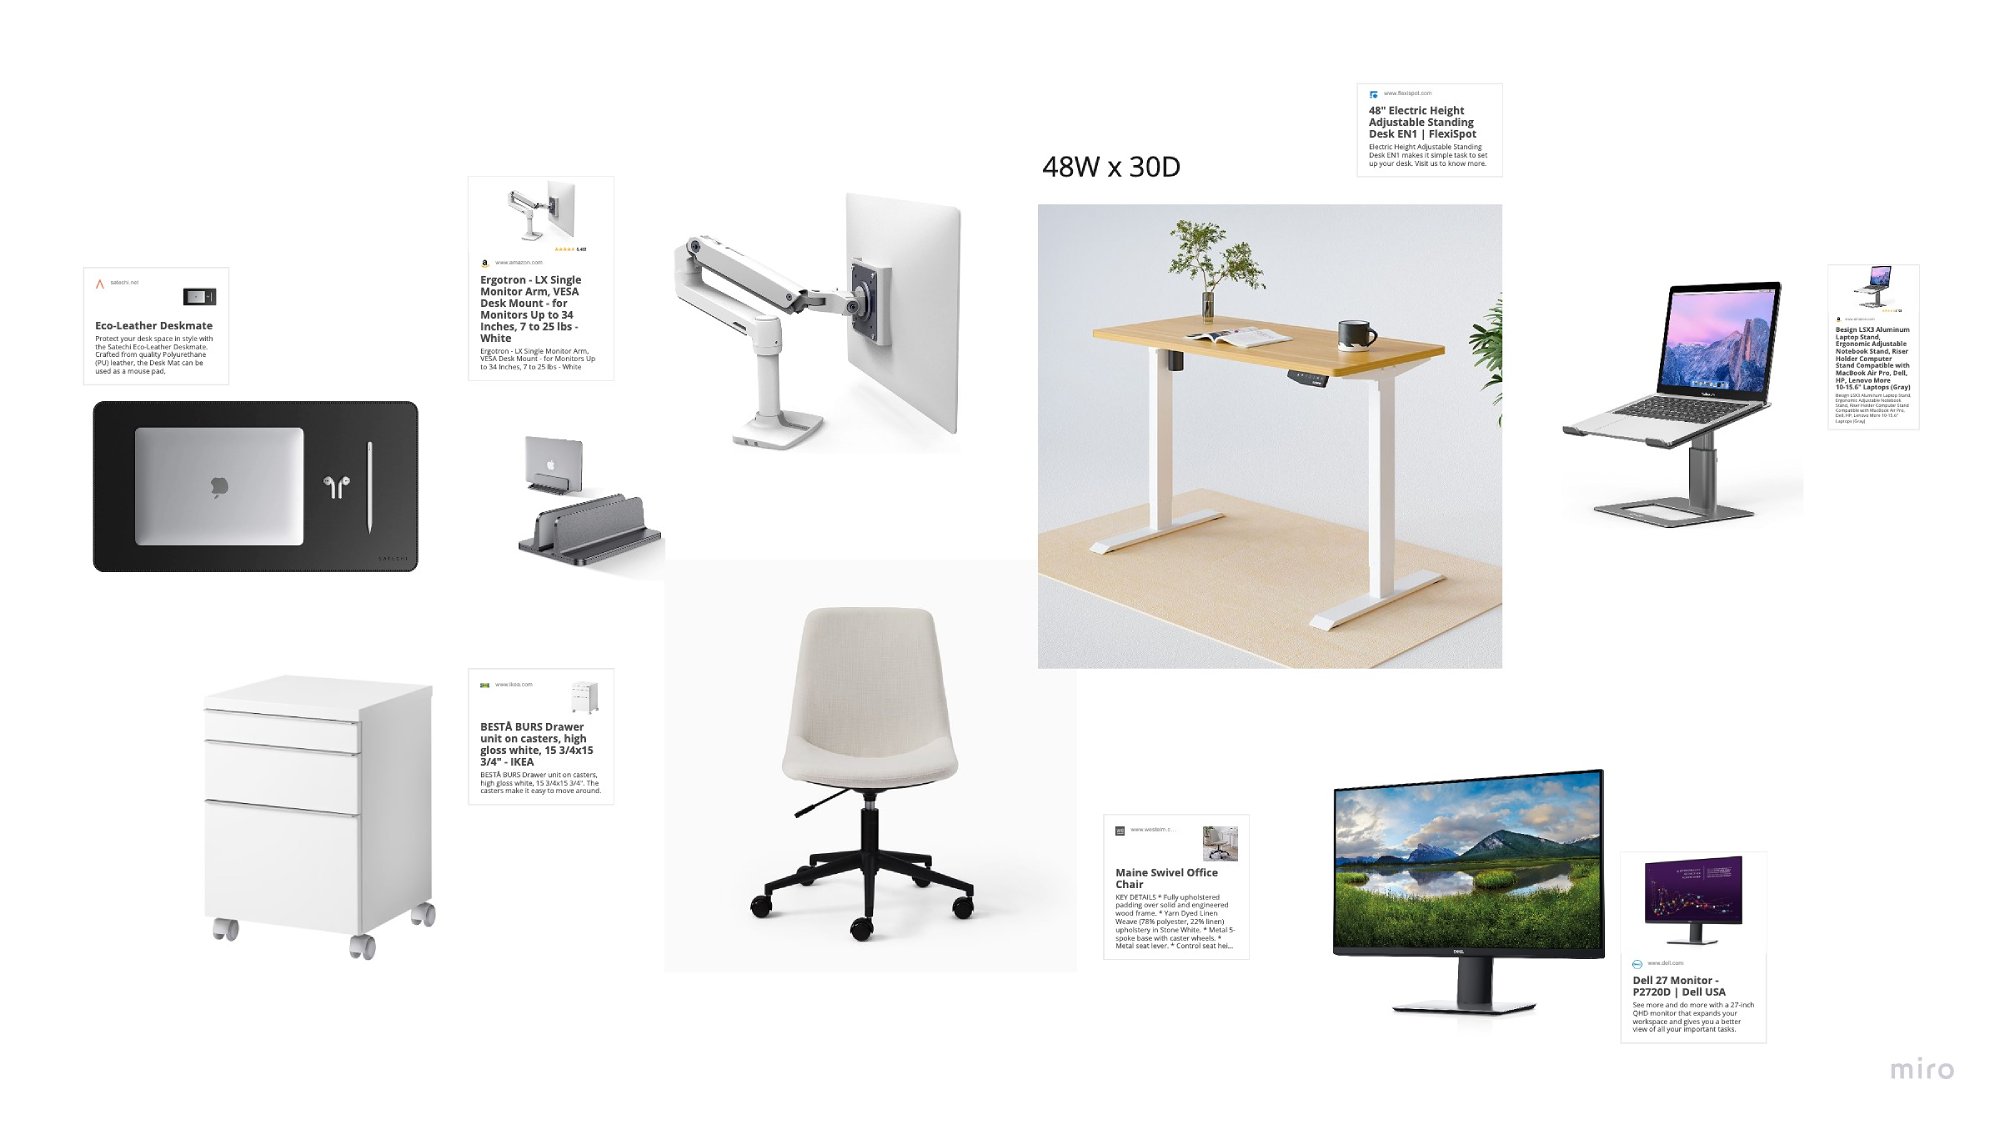 A Miro board featuring all the main items in Katie’s minimal desk setup